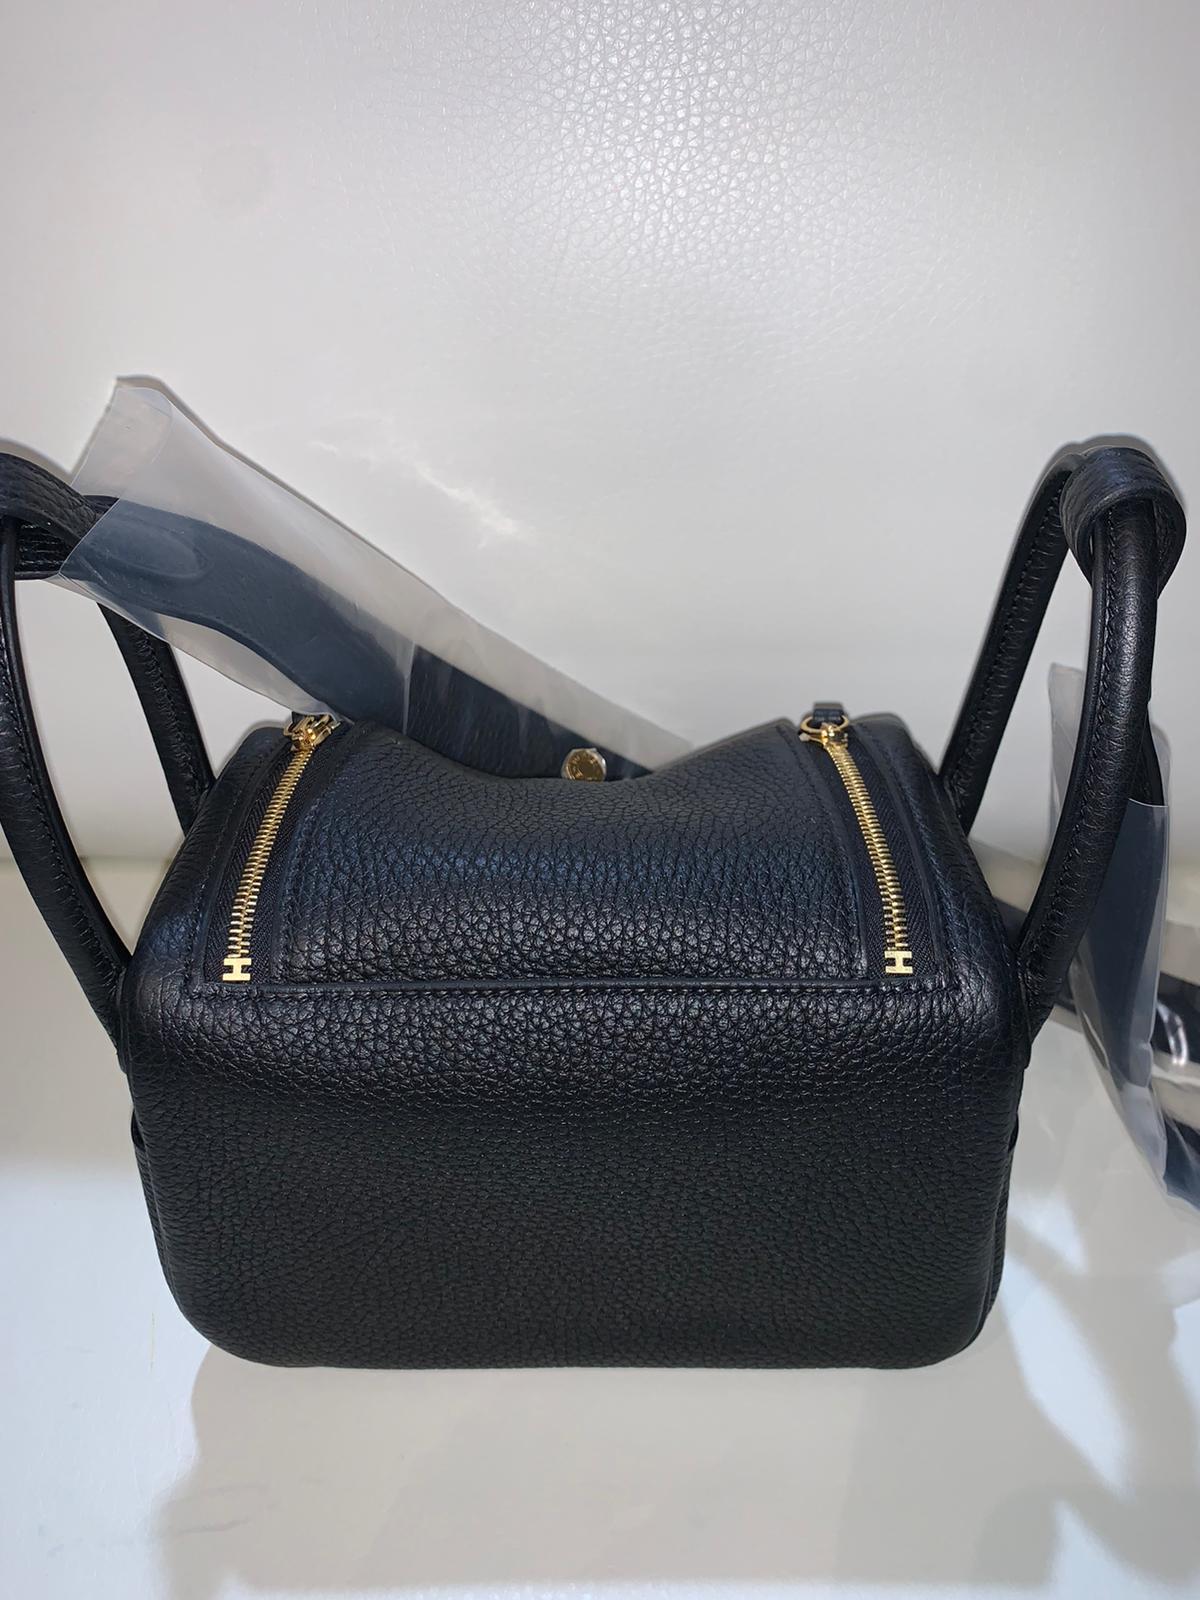 The Hermes Lindy bag was created as a nod to the American Lindy Hop dance and a love of movement. This graceful bag has an atypical shape that hugs the curves of the body but is still perfect for daily practical use. 

This Hermes Mini Lindy is